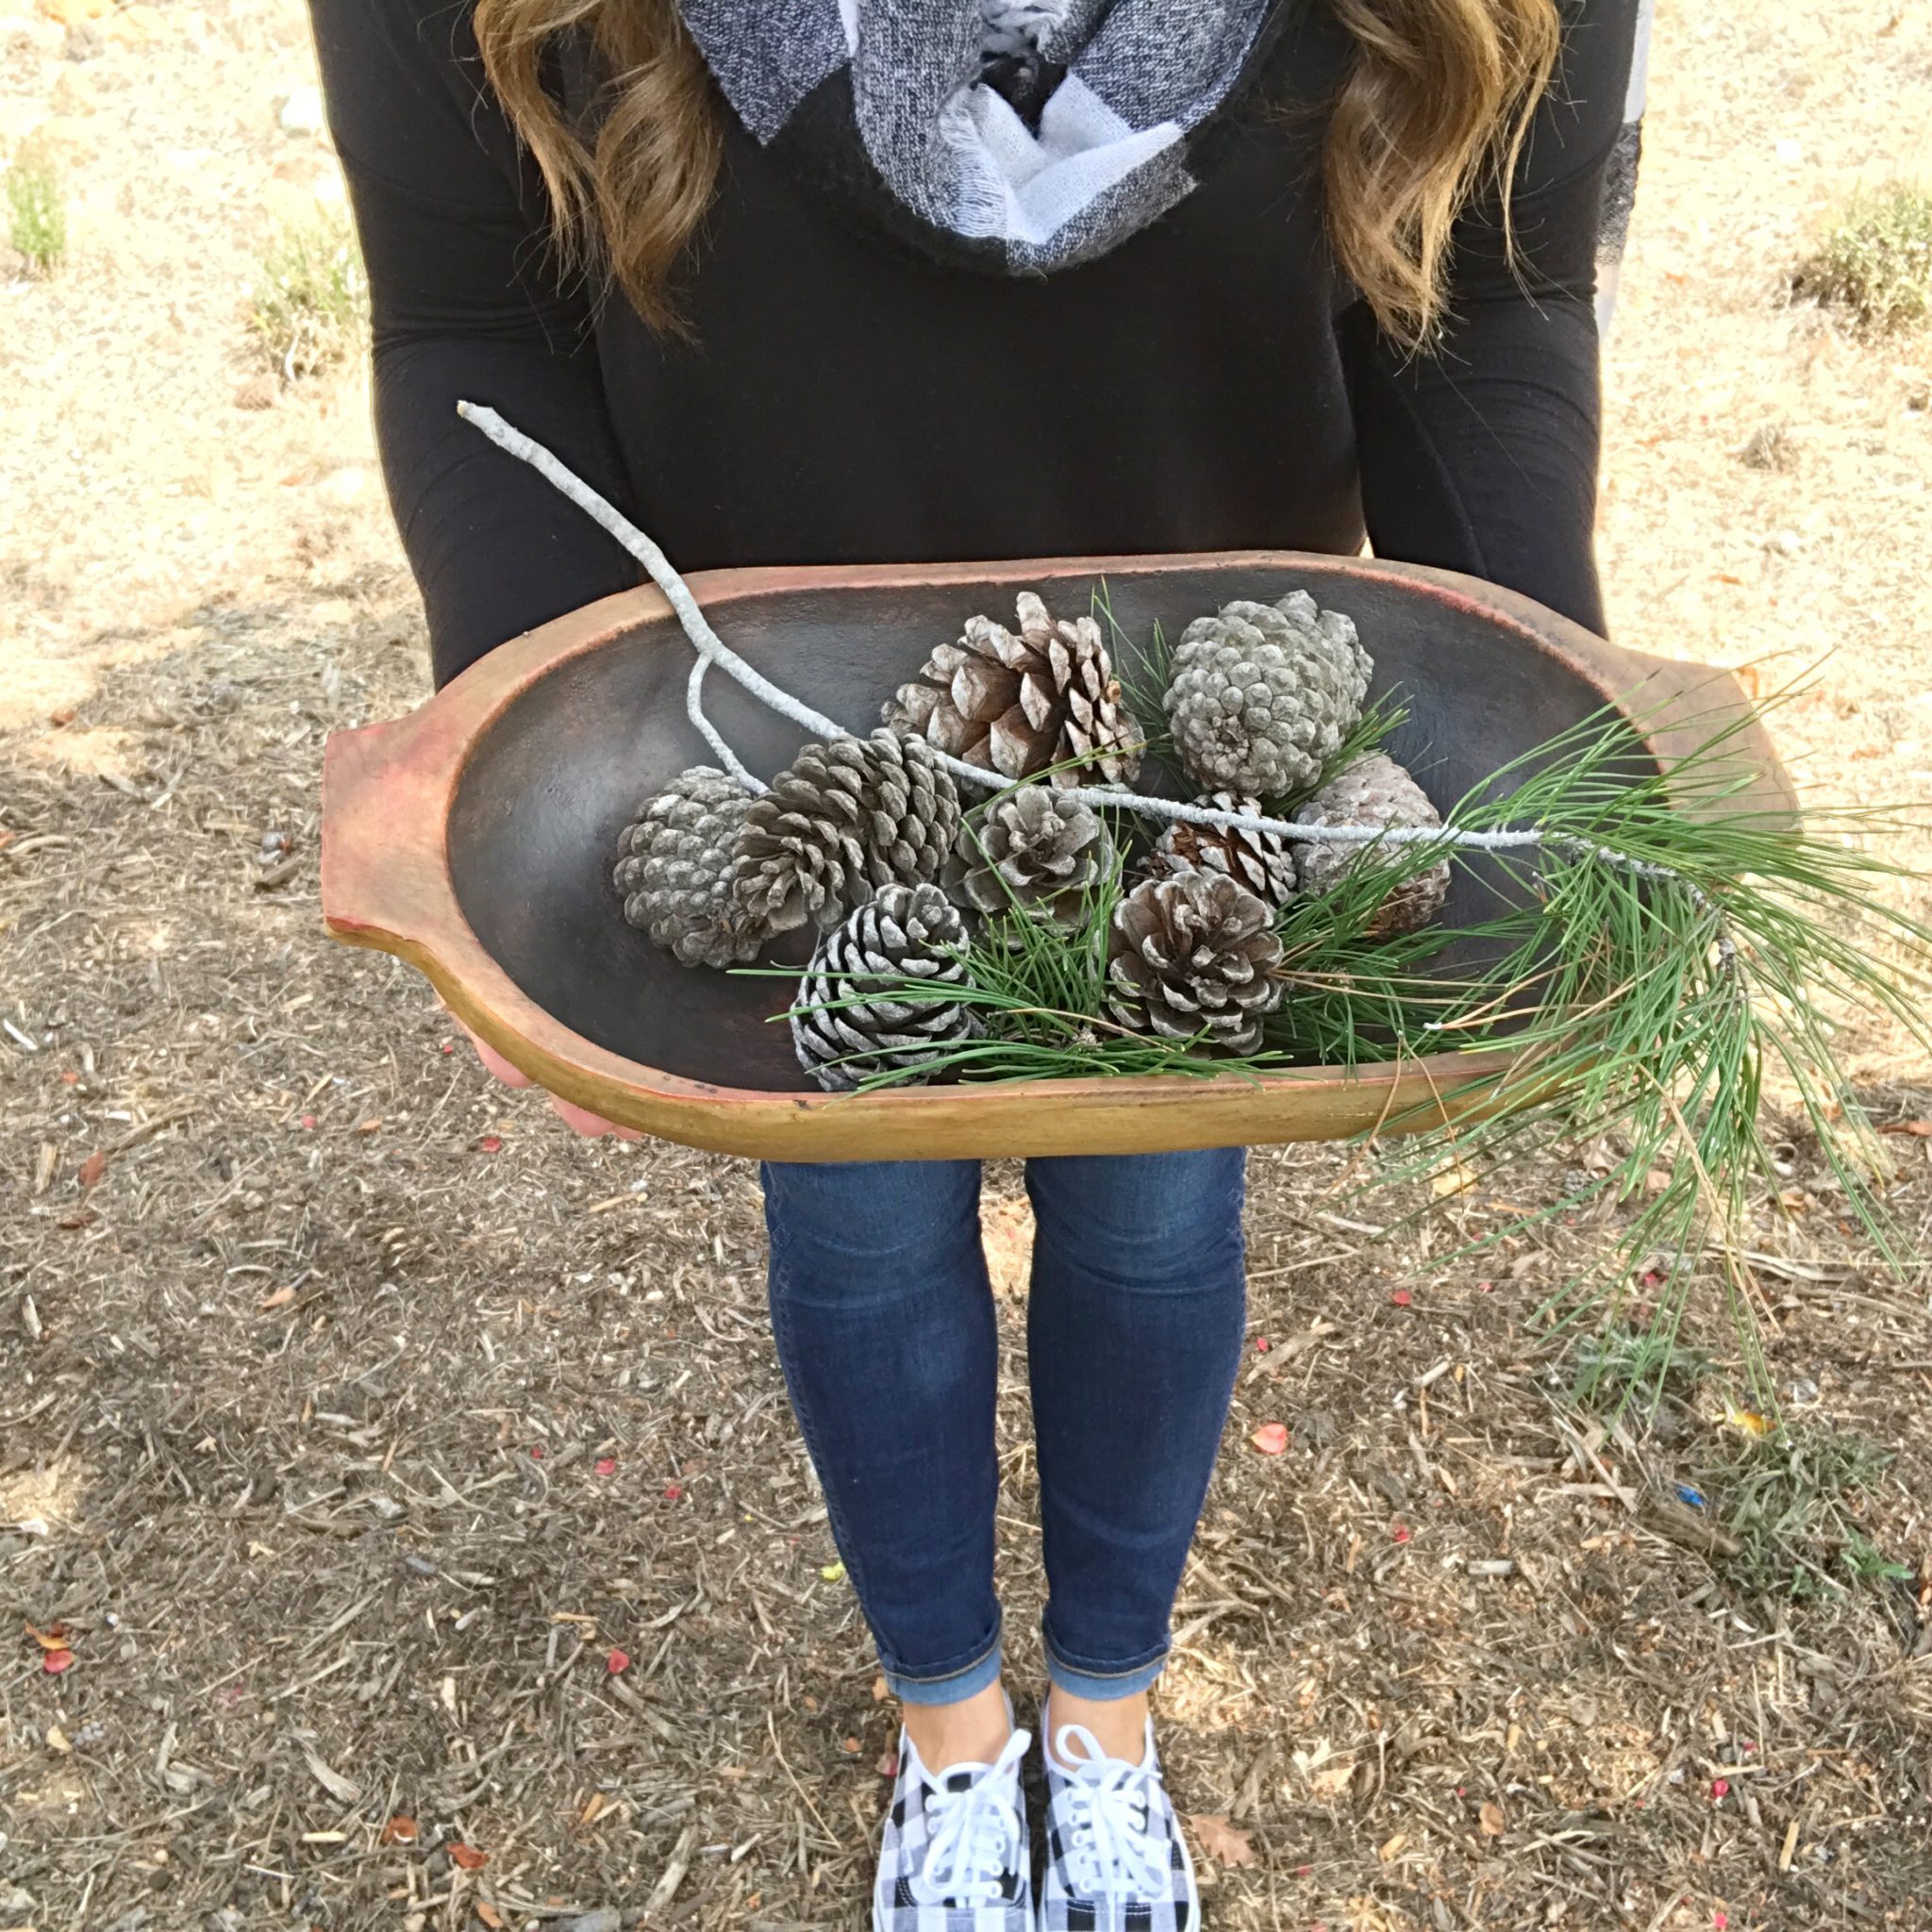 How to Make Pine Cones Pop :: Dry and Debug Pine Cones - An